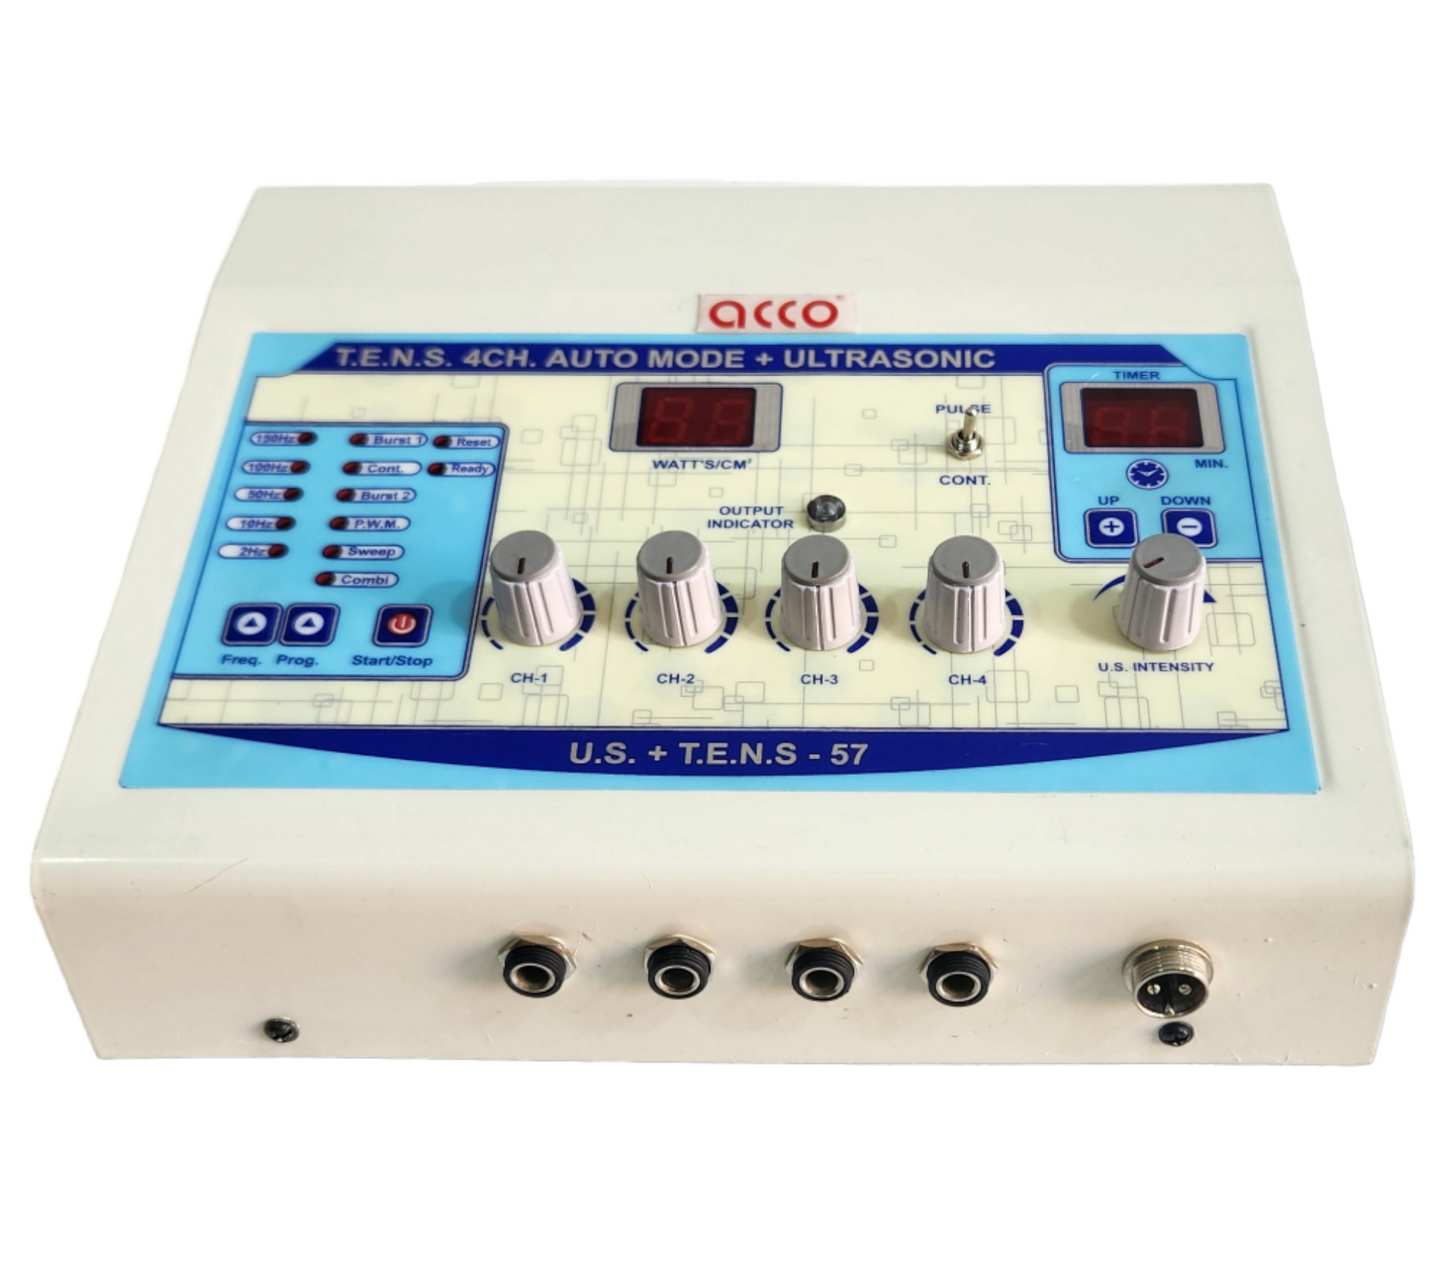 acco Tens 4 Ch + Ultrasonic 1Mhz Physiotherapy Combo